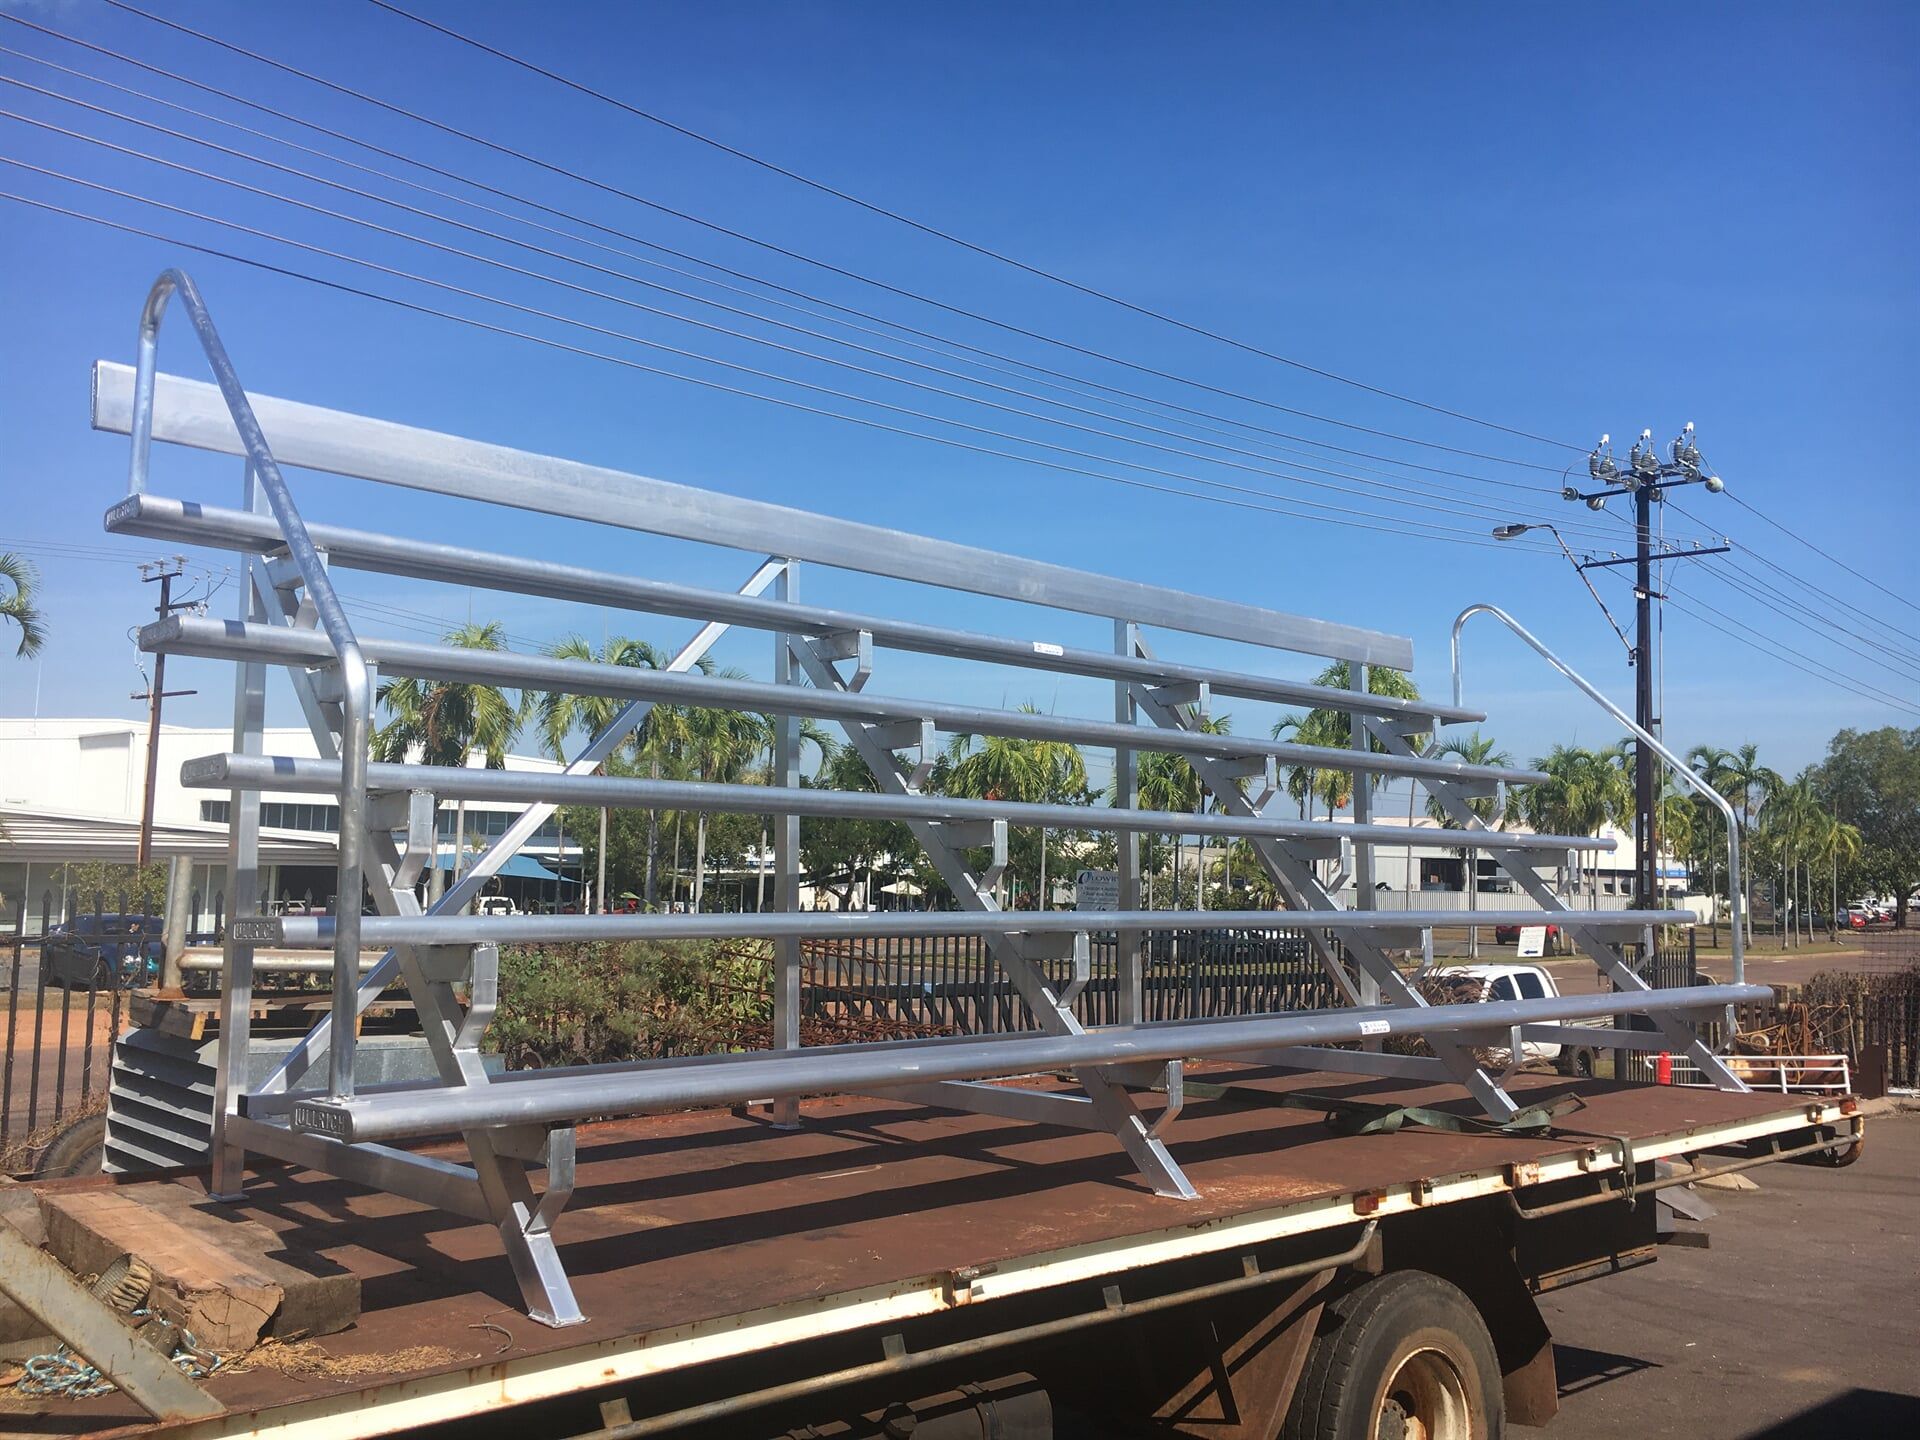 Custom Steel Products — Welding and Fabrication Services in Winnellie, NT